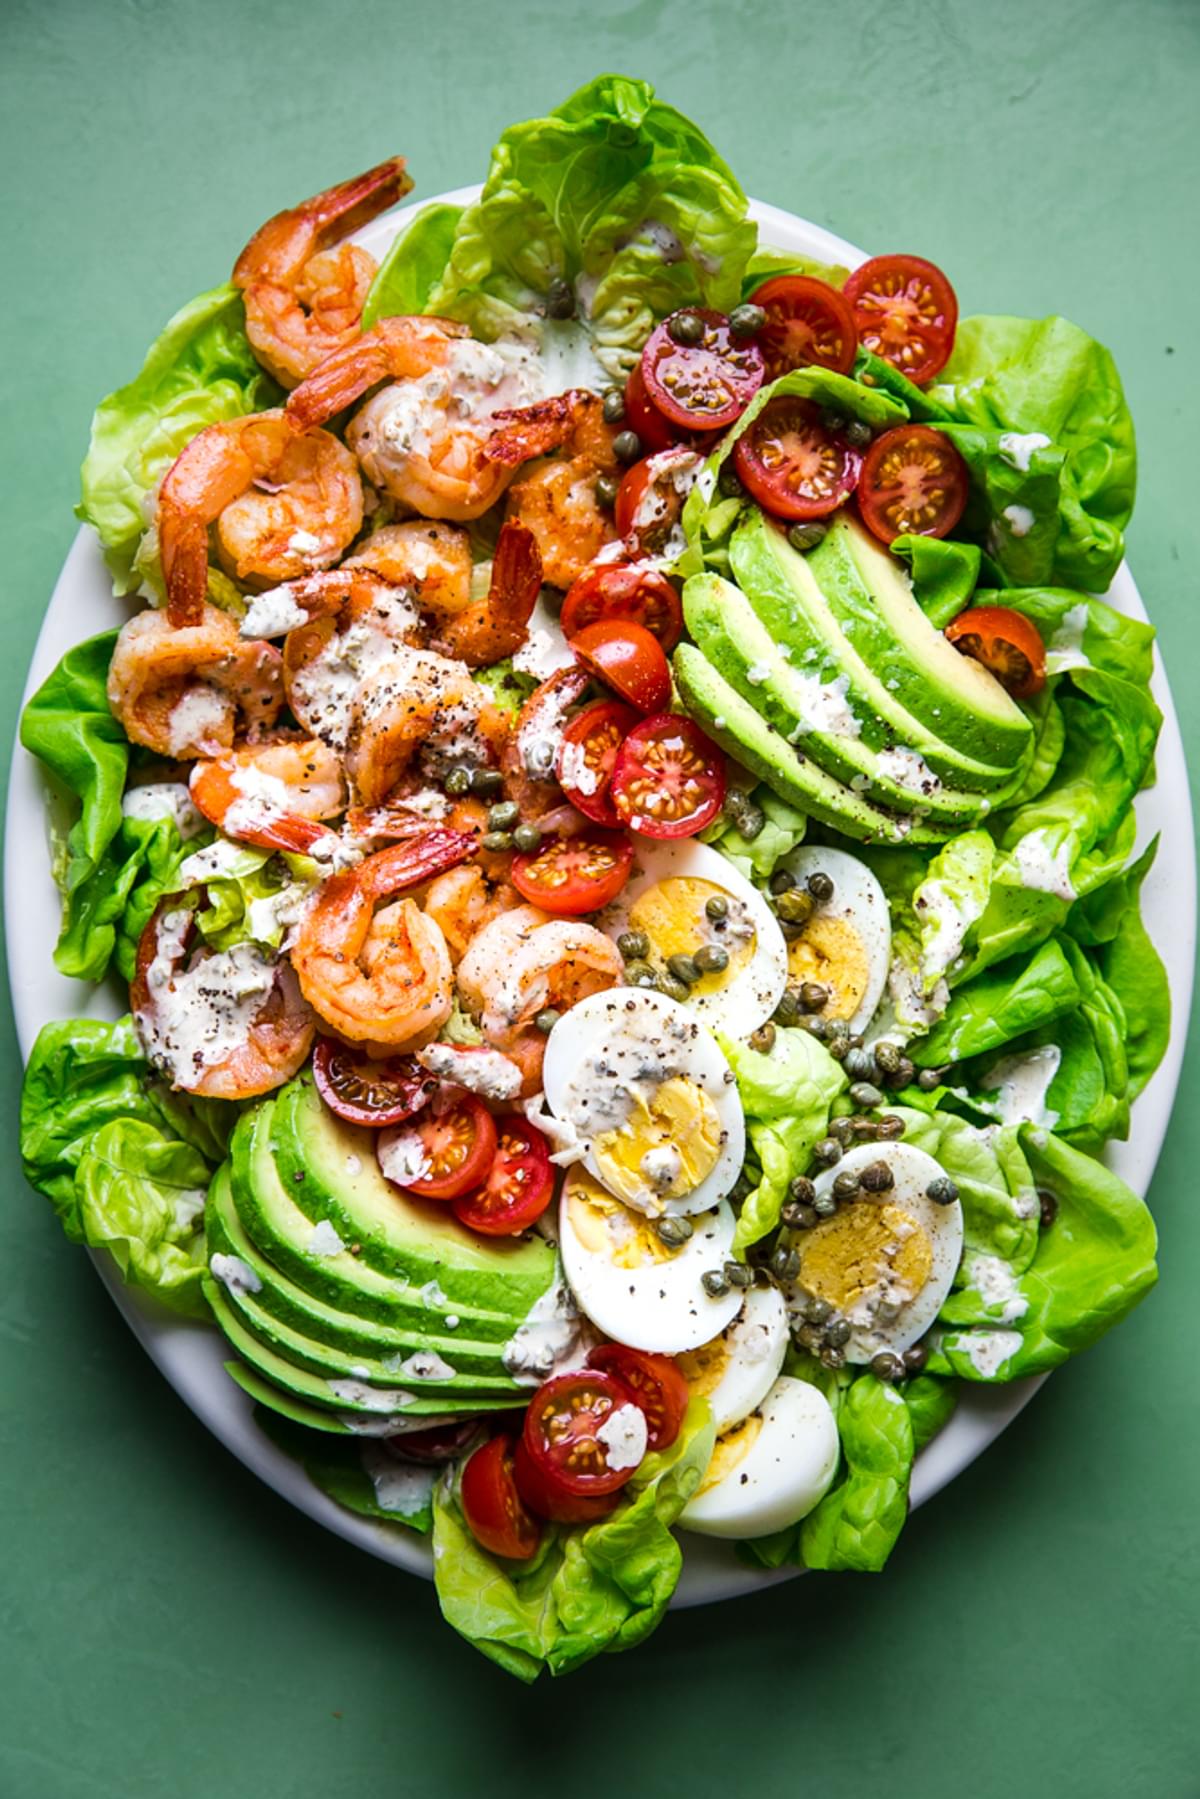 homemade Shrimp Louie salad on a plater with avocado, romaine lettuce, hard boiled eggs, tomatoes, capers and a dressing